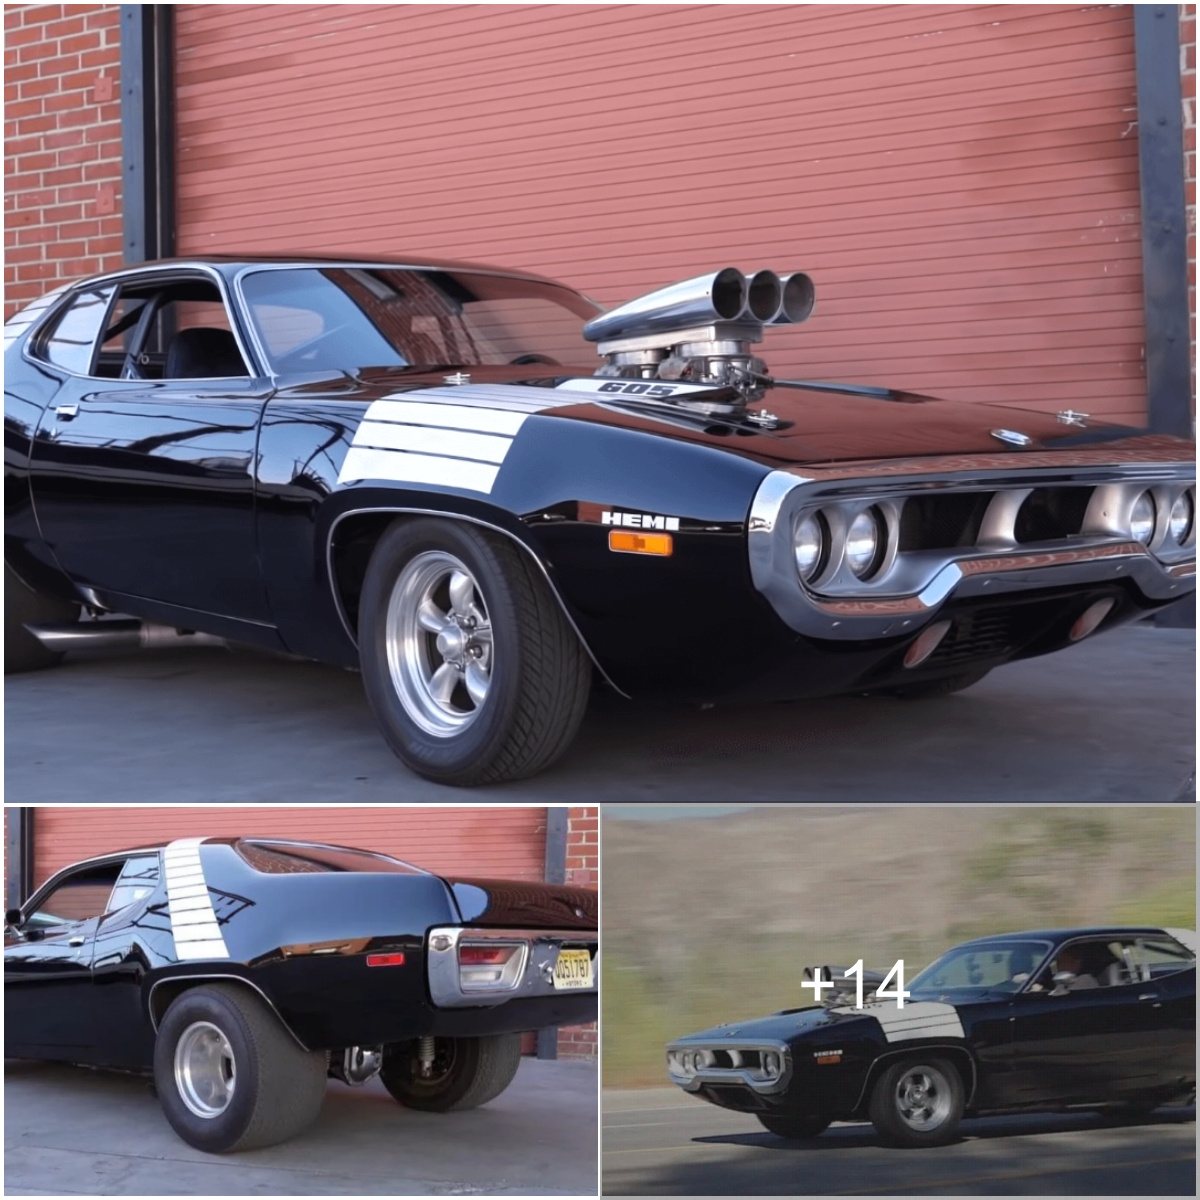 Unleashing Power: The 1,000HP Plymouth Road Runner with Big Cube HEMI V8